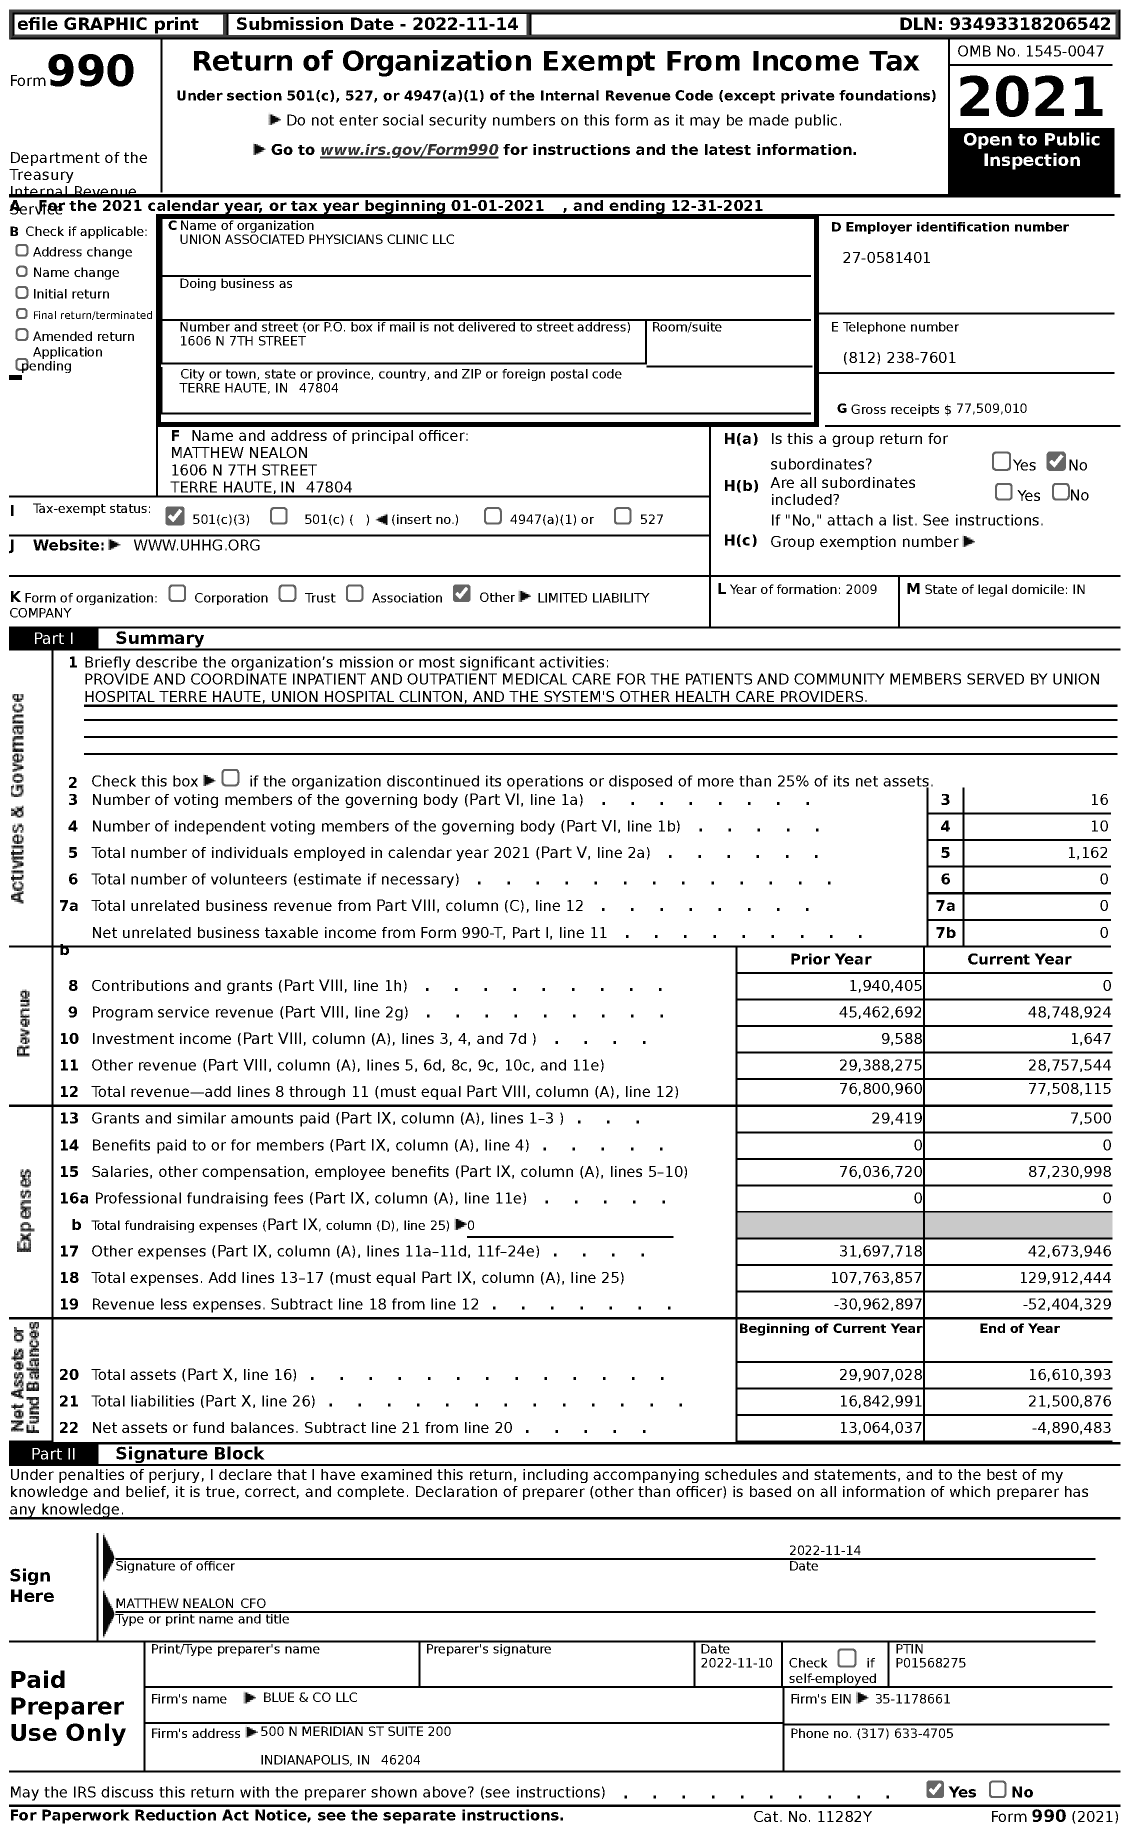 Image of first page of 2021 Form 990 for Union Associated Physicians Clinic LLC